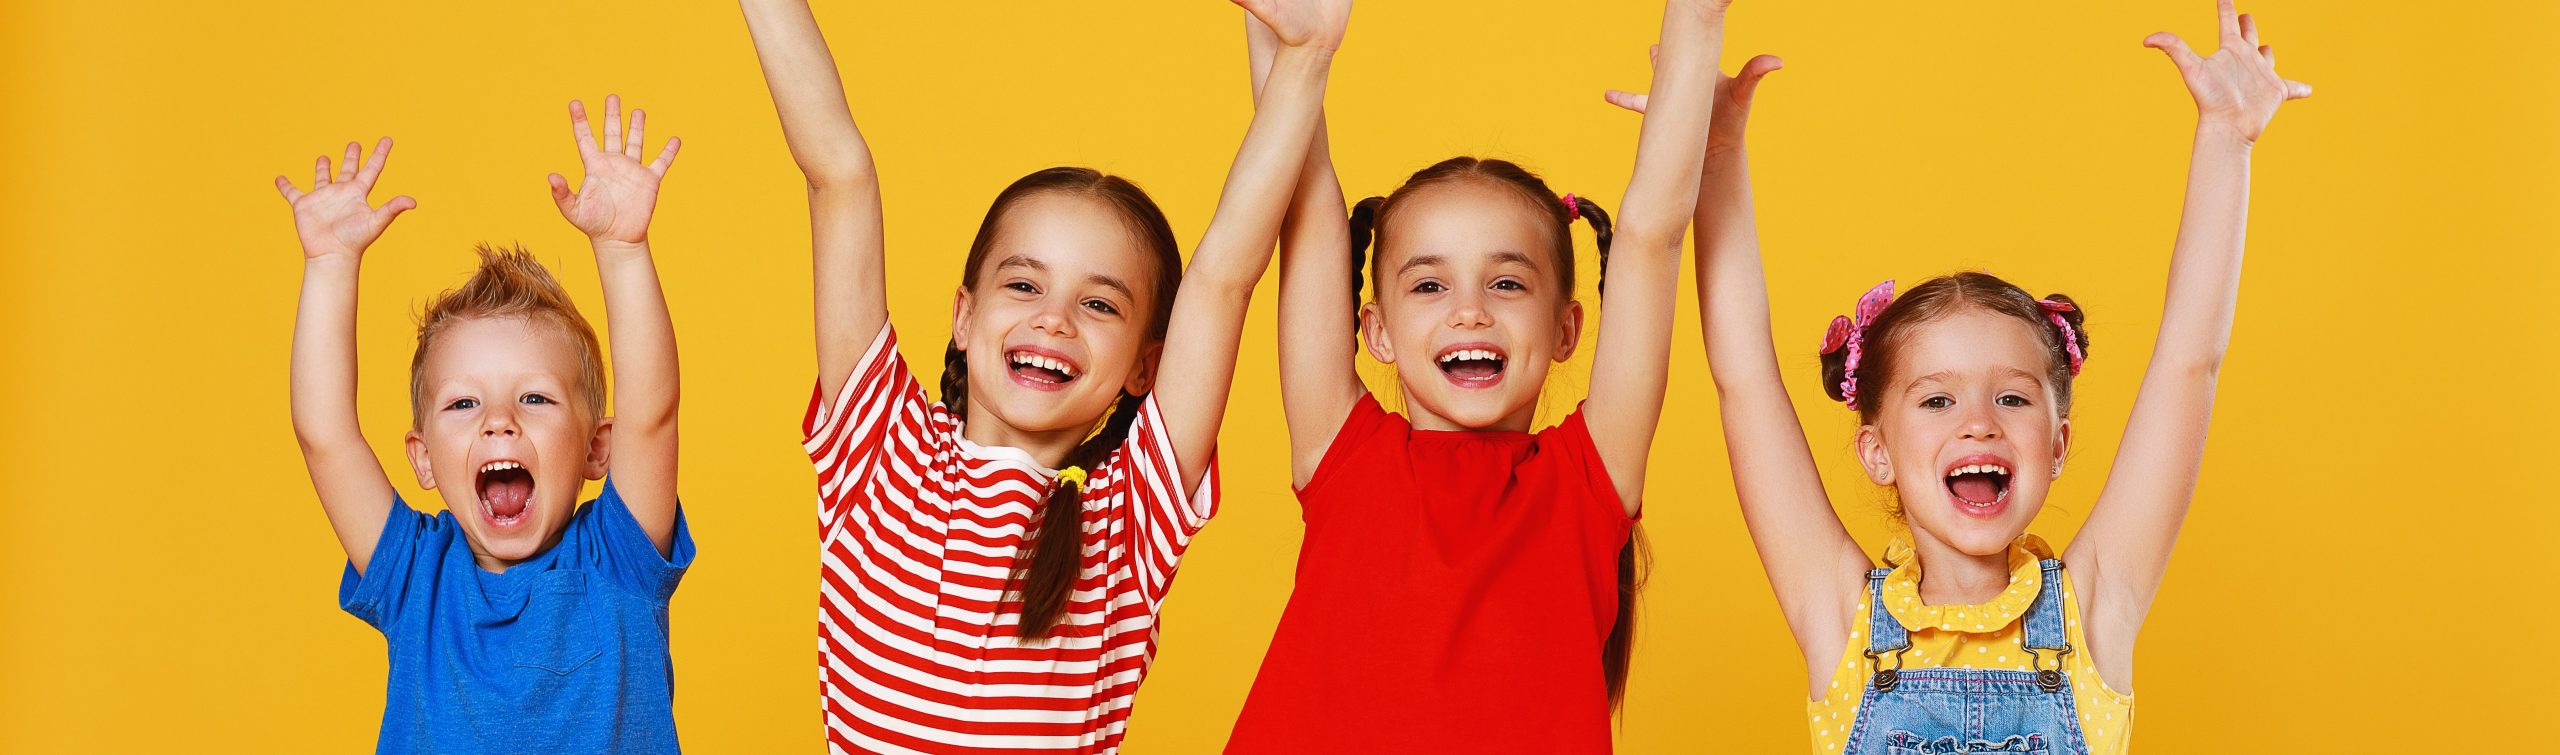 group of cheerful happy children on colored yellow background